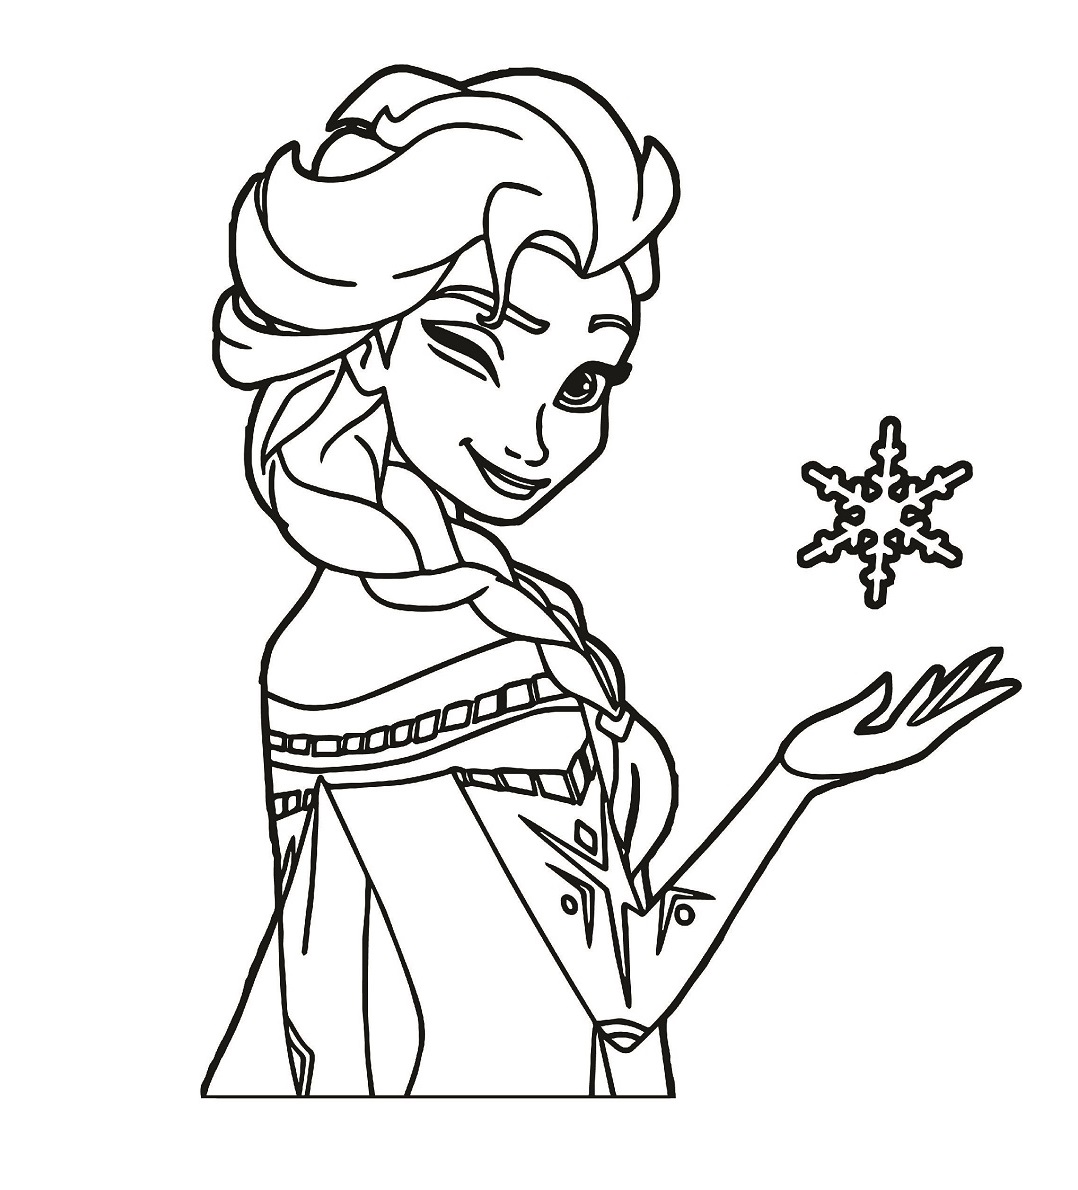 Printable Frozen outline pen drawing Coloring Page for kids.